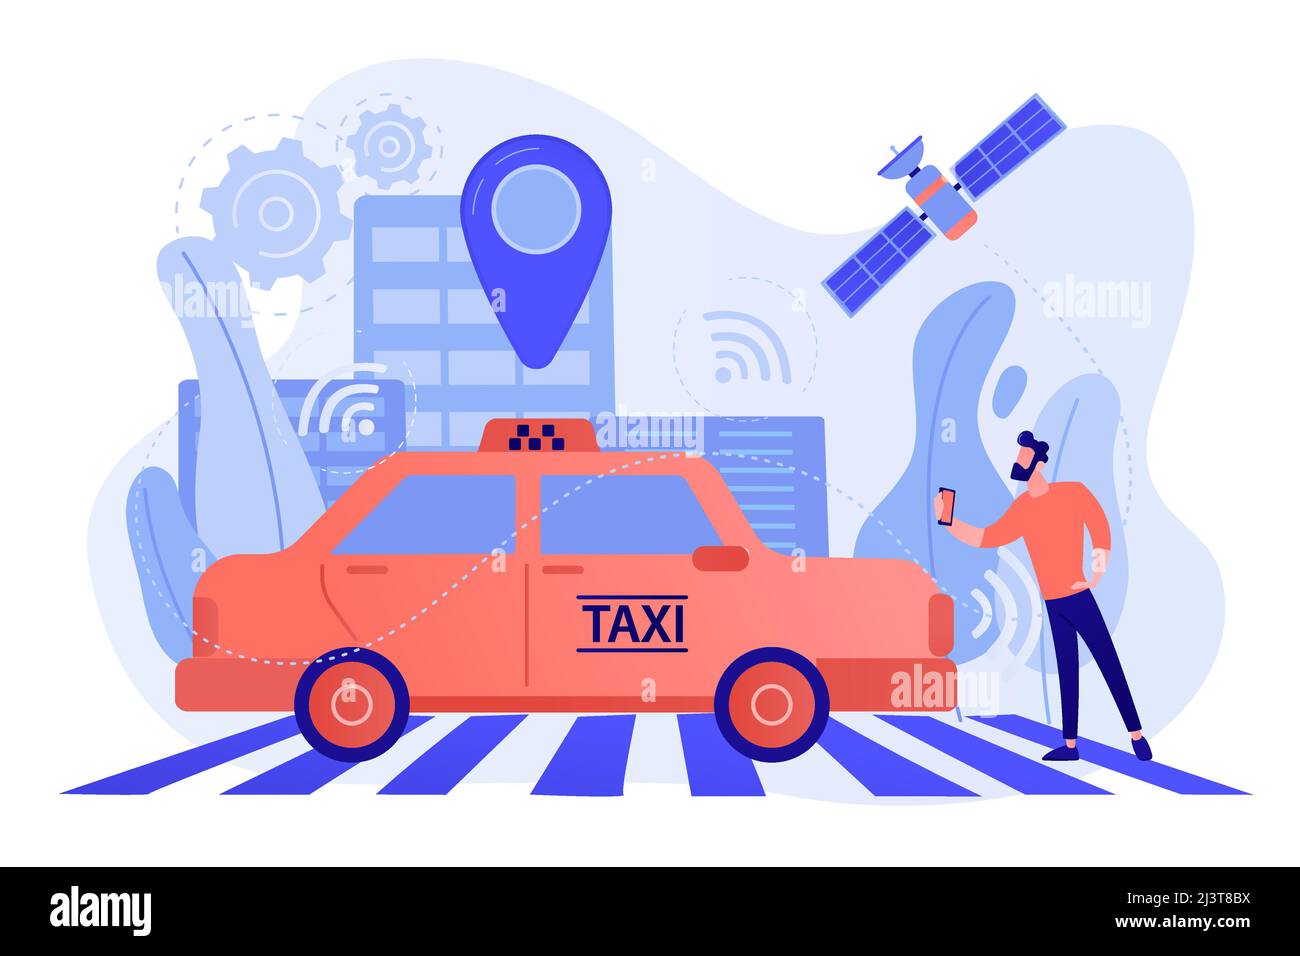 Pink taxi cab Stock Vector Images - Alamy